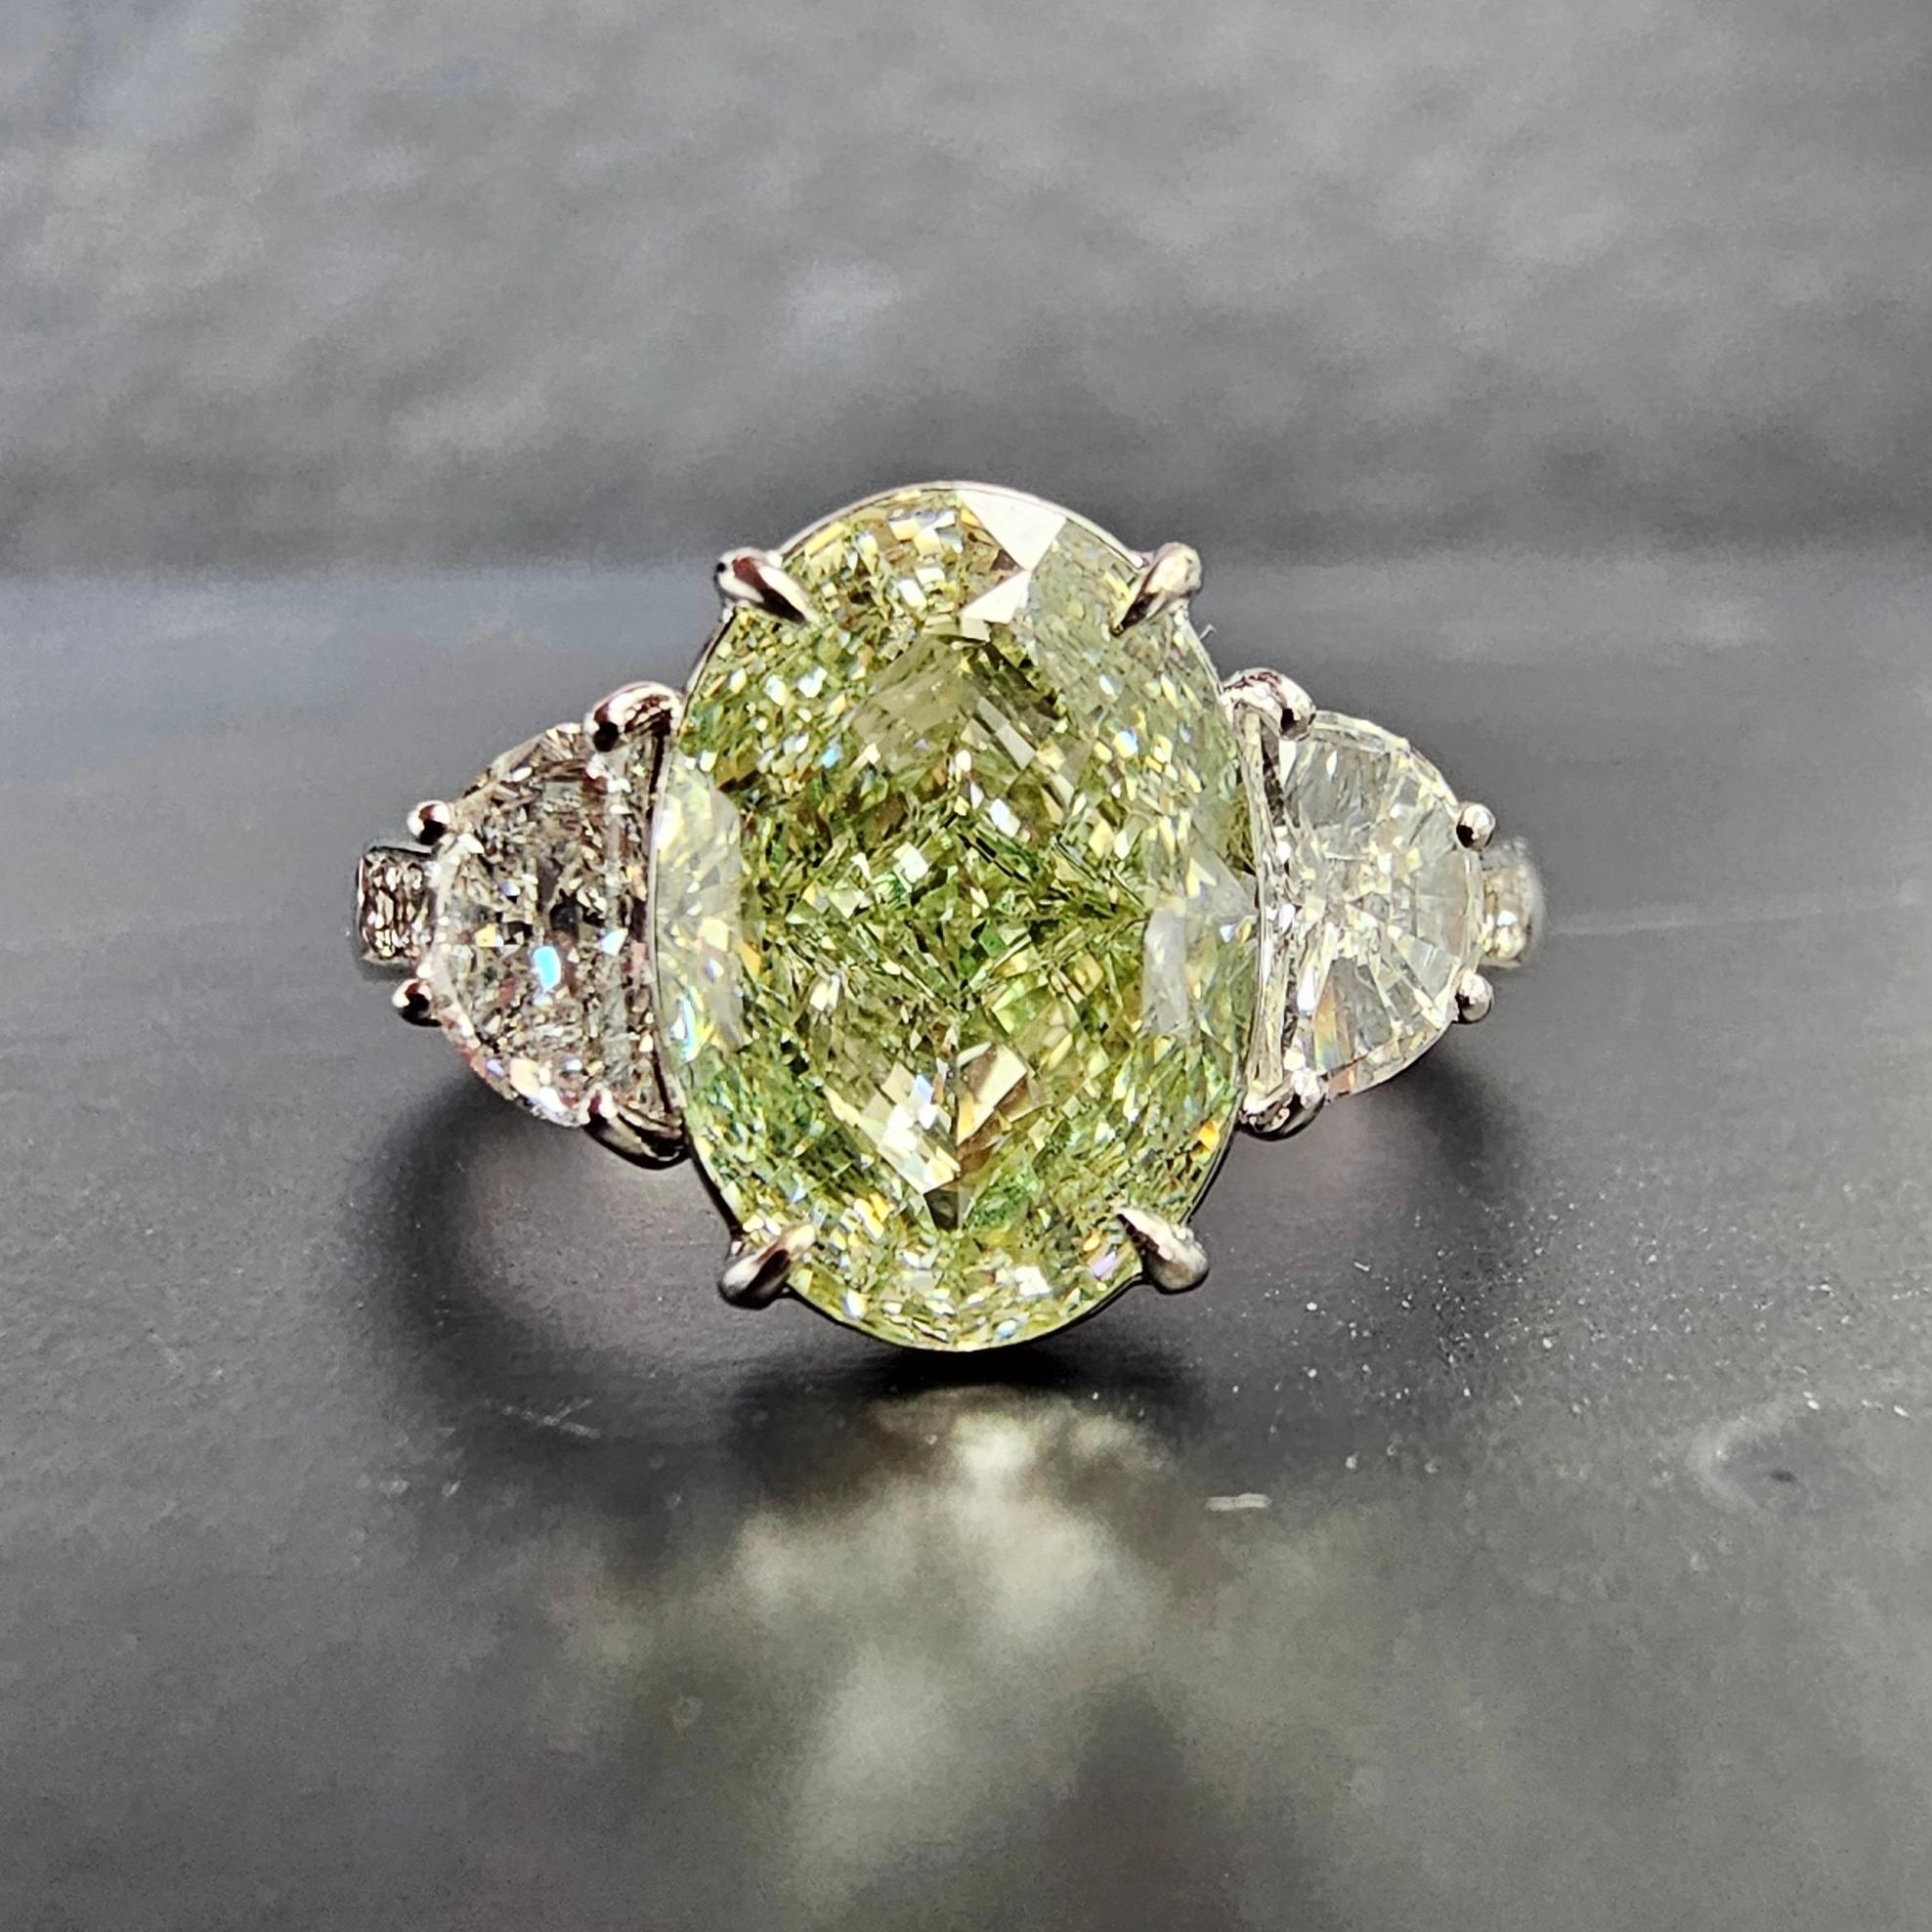 Our new line of diamonds with flavors of green in them set in a ring with green painted enamel under the diamond to make it appear as a pure green diamond. The diamond is 100% natural and GIA certified, but the ring is colored underneath the stone